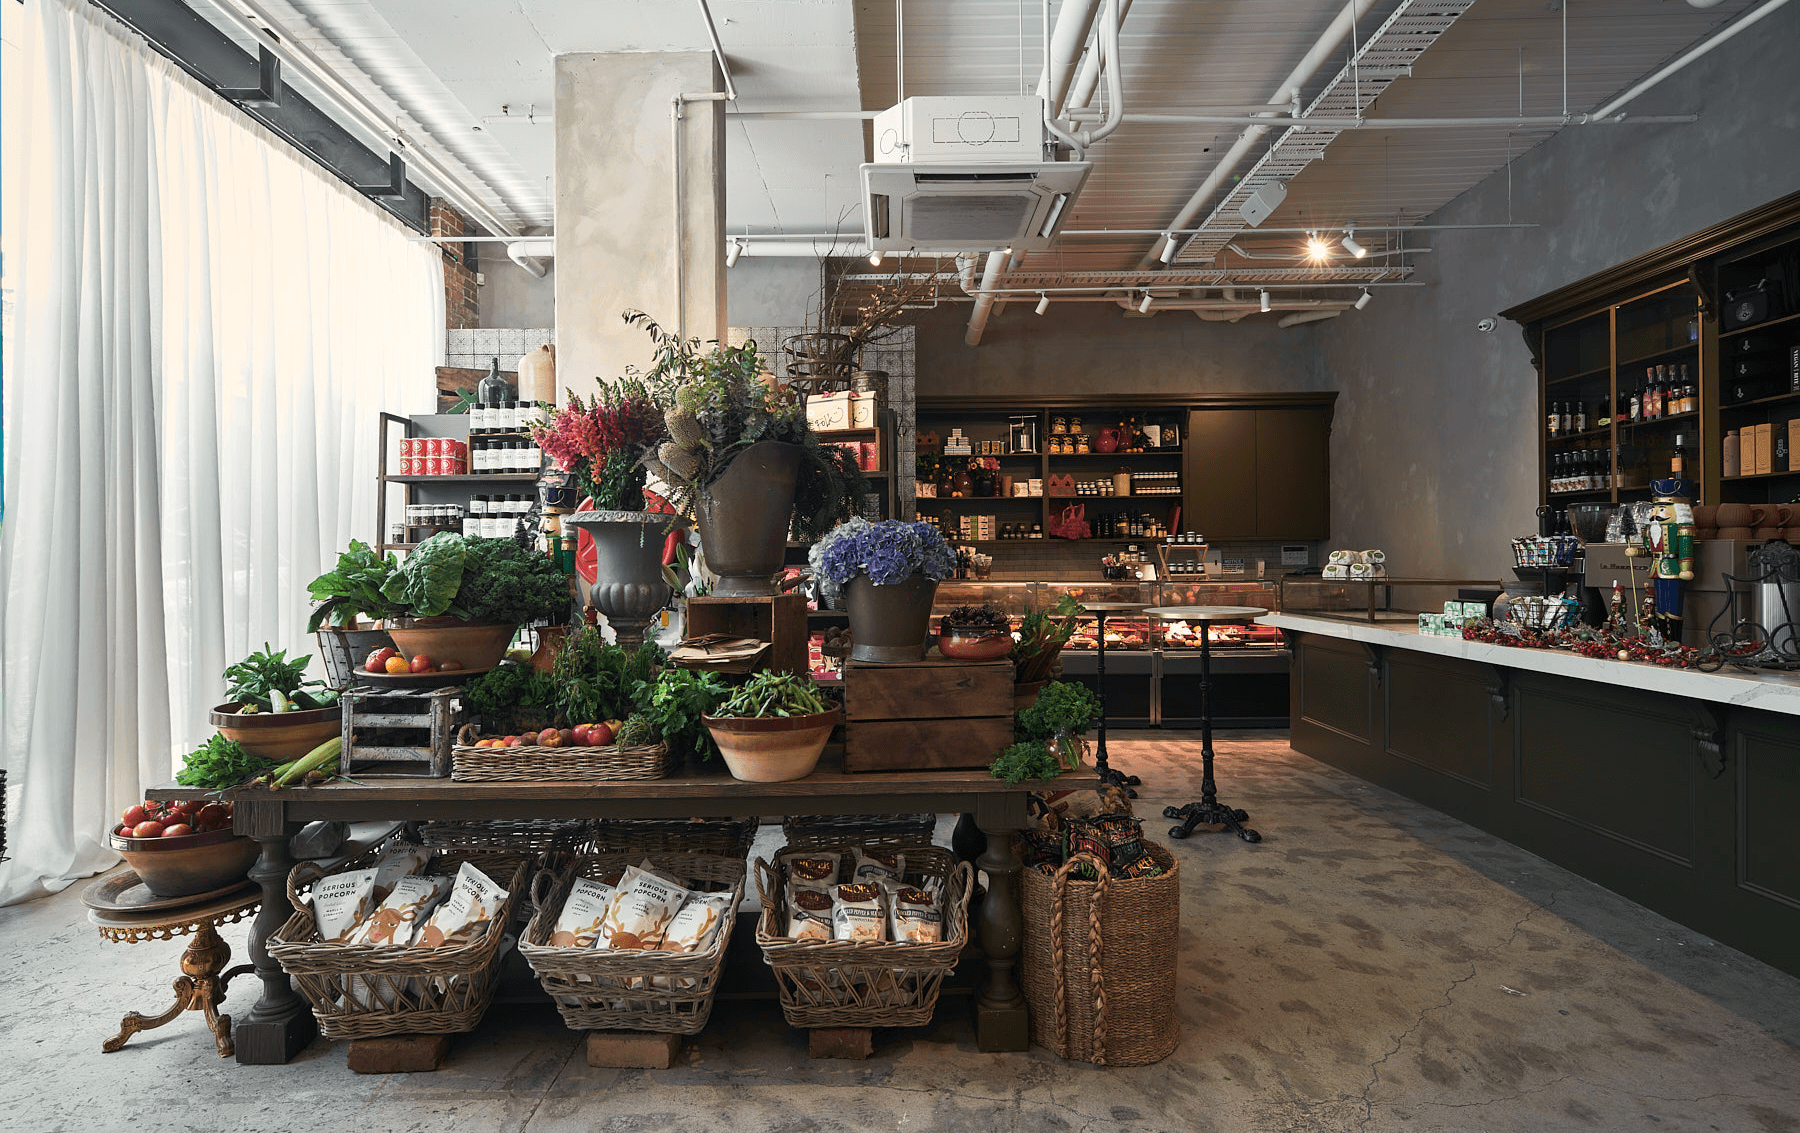 A grocery section of food and produce inside a contender for the best vegetarian restaurant in Melbourne.